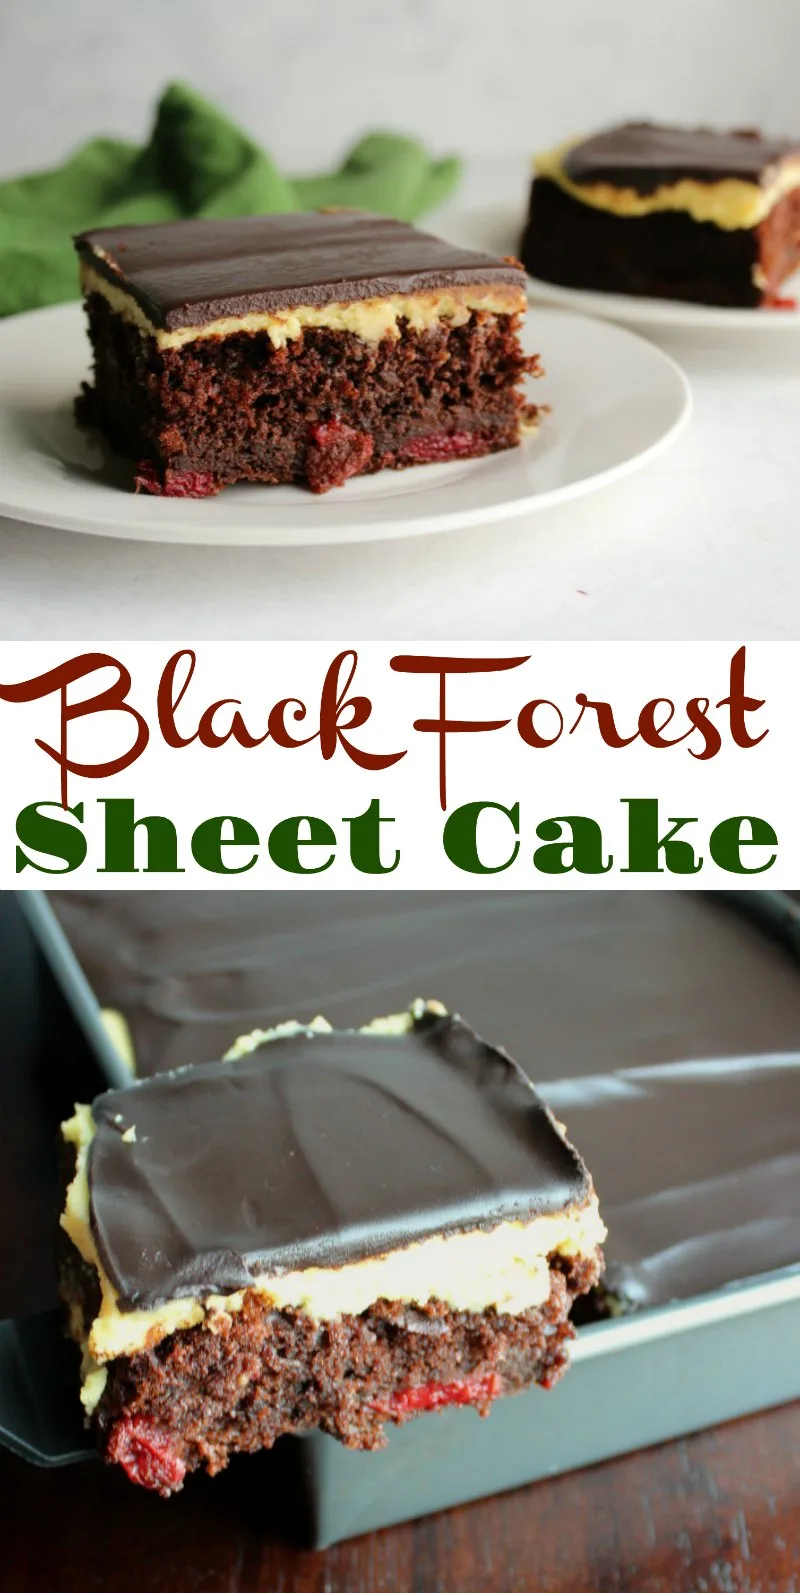 This simplified version of black forest sheet cake still feels ultra luxe. Moist chocolate cake studded with cherries, creamy vanilla German buttercream and a layer of ganache come together to make your dessert dreams come true!